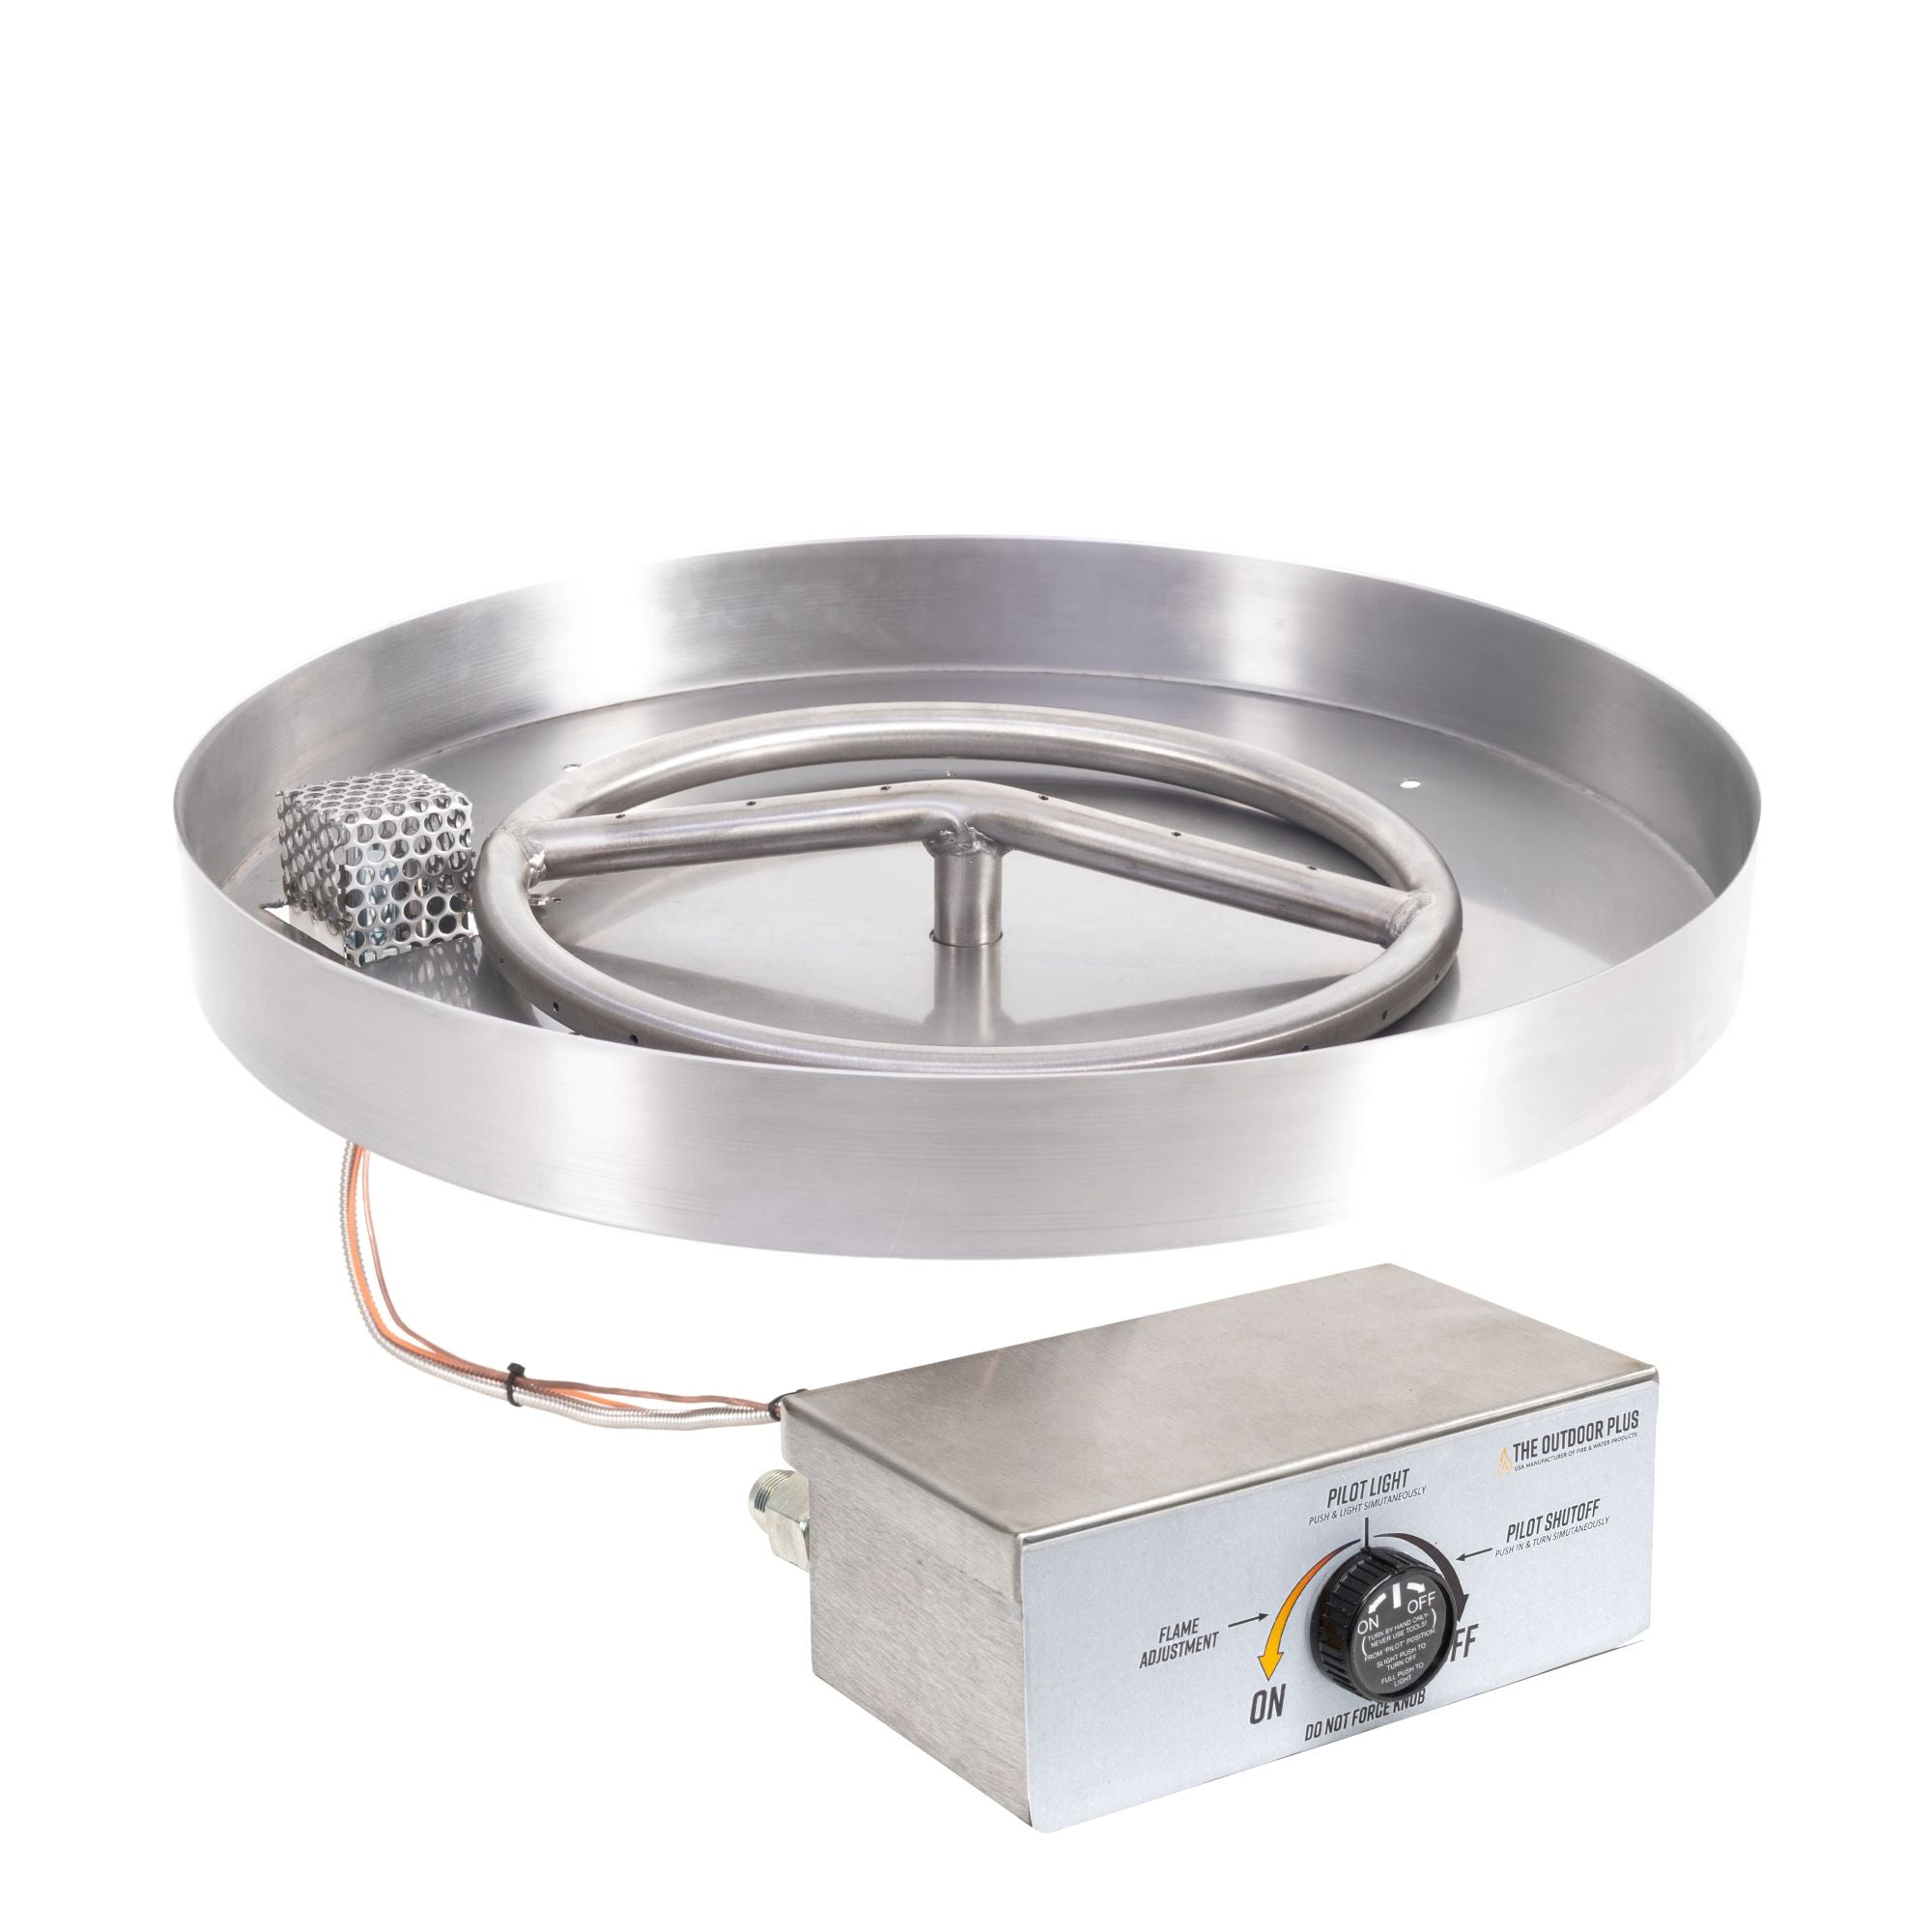 The Outdoor Plus Round Lipless Drop-in Pan with Stainless Steel Round Burner